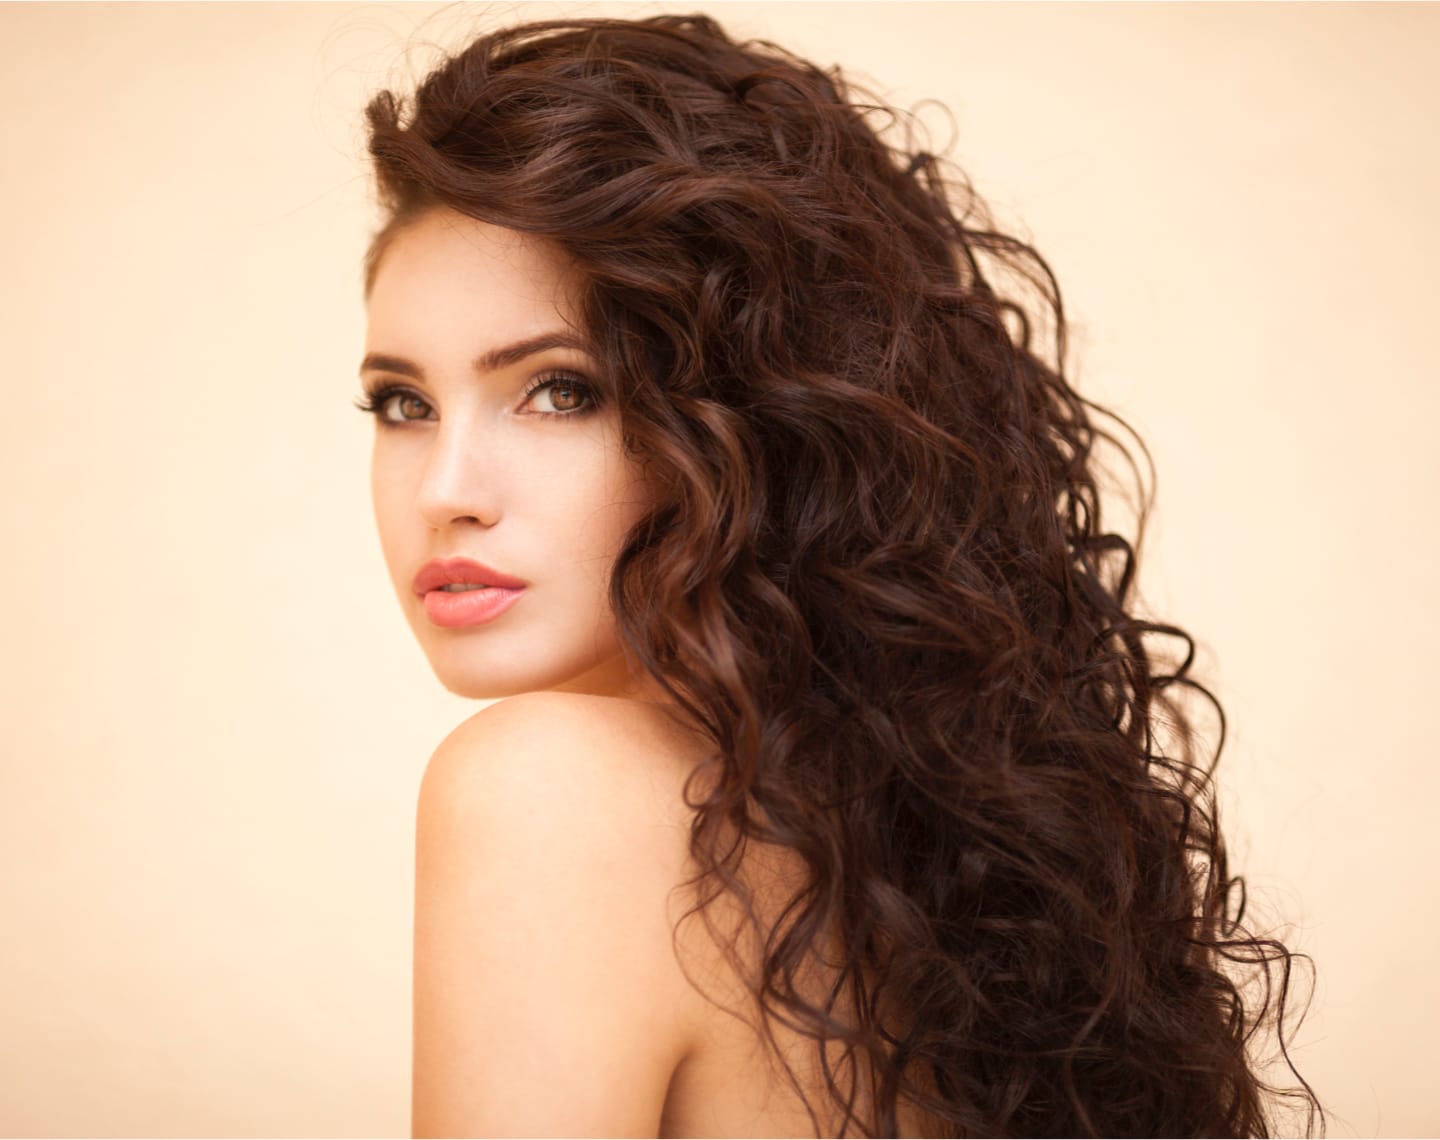 Woman with voluminous curly hair